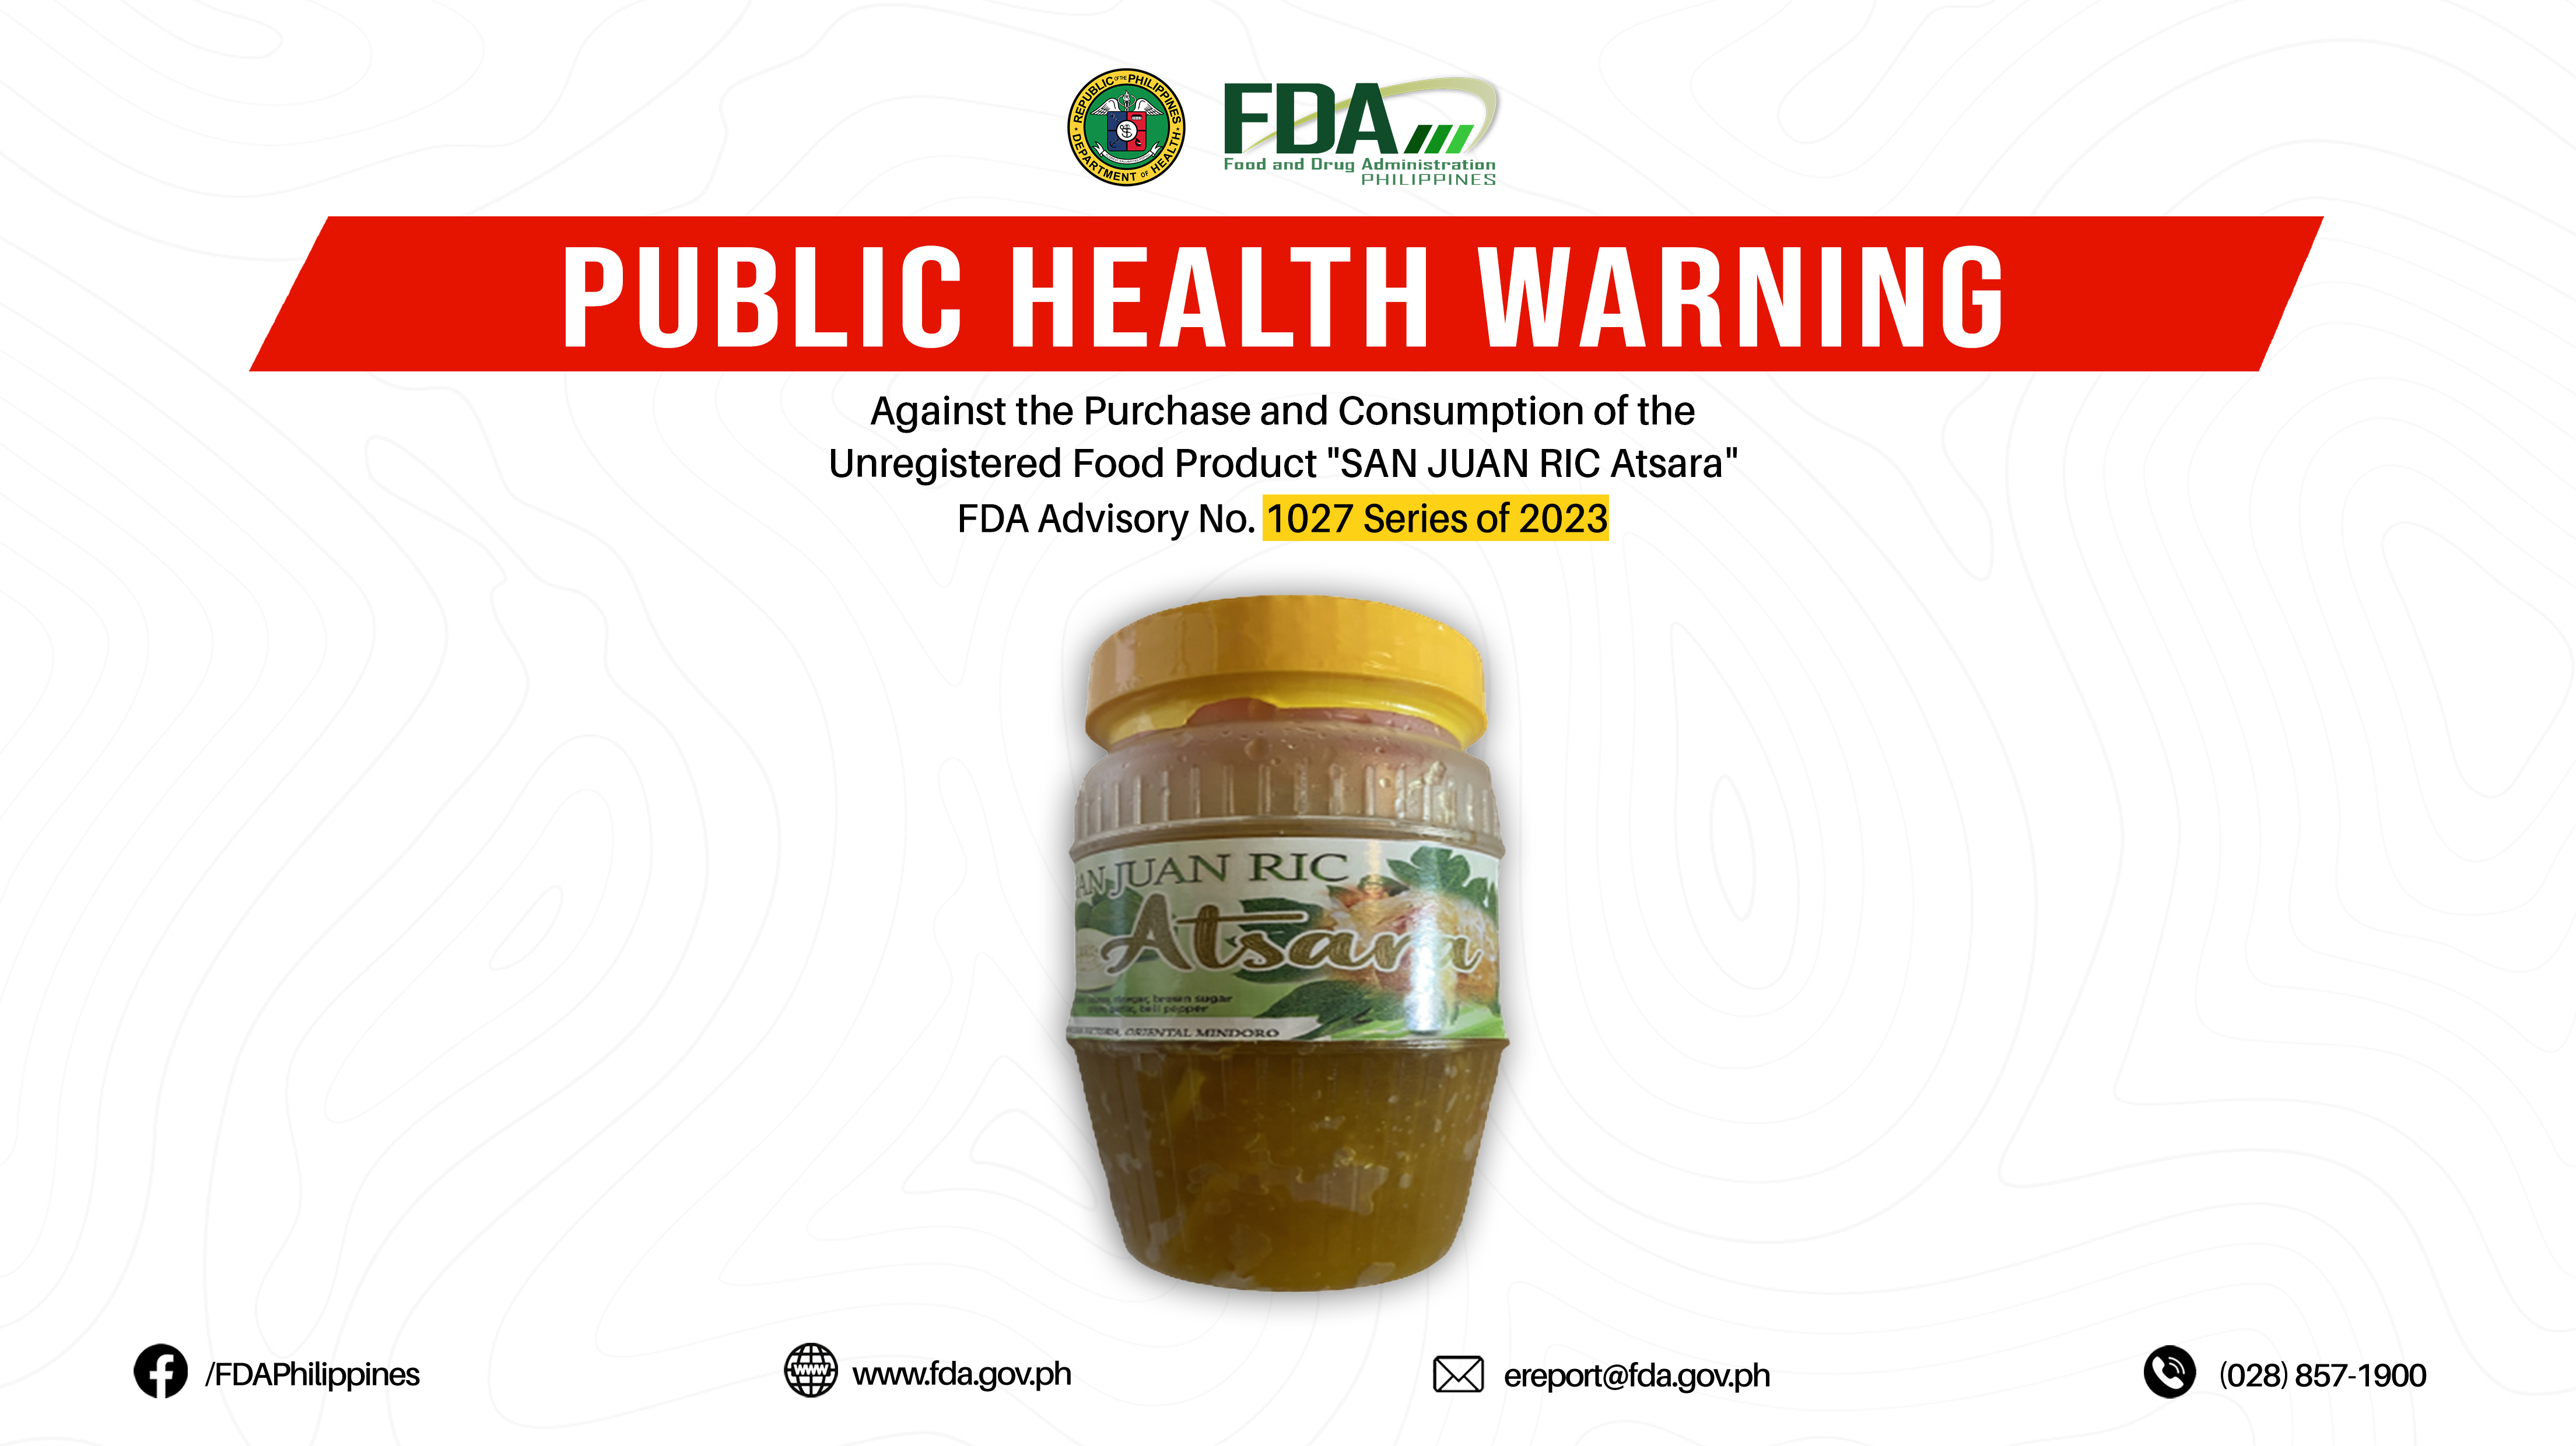 FDA Advisory No.2023-1027 || Public Health Warning Against the Purchase and Consumption of the Unregistered Food Product “SAN JUAN RIC Atsara”